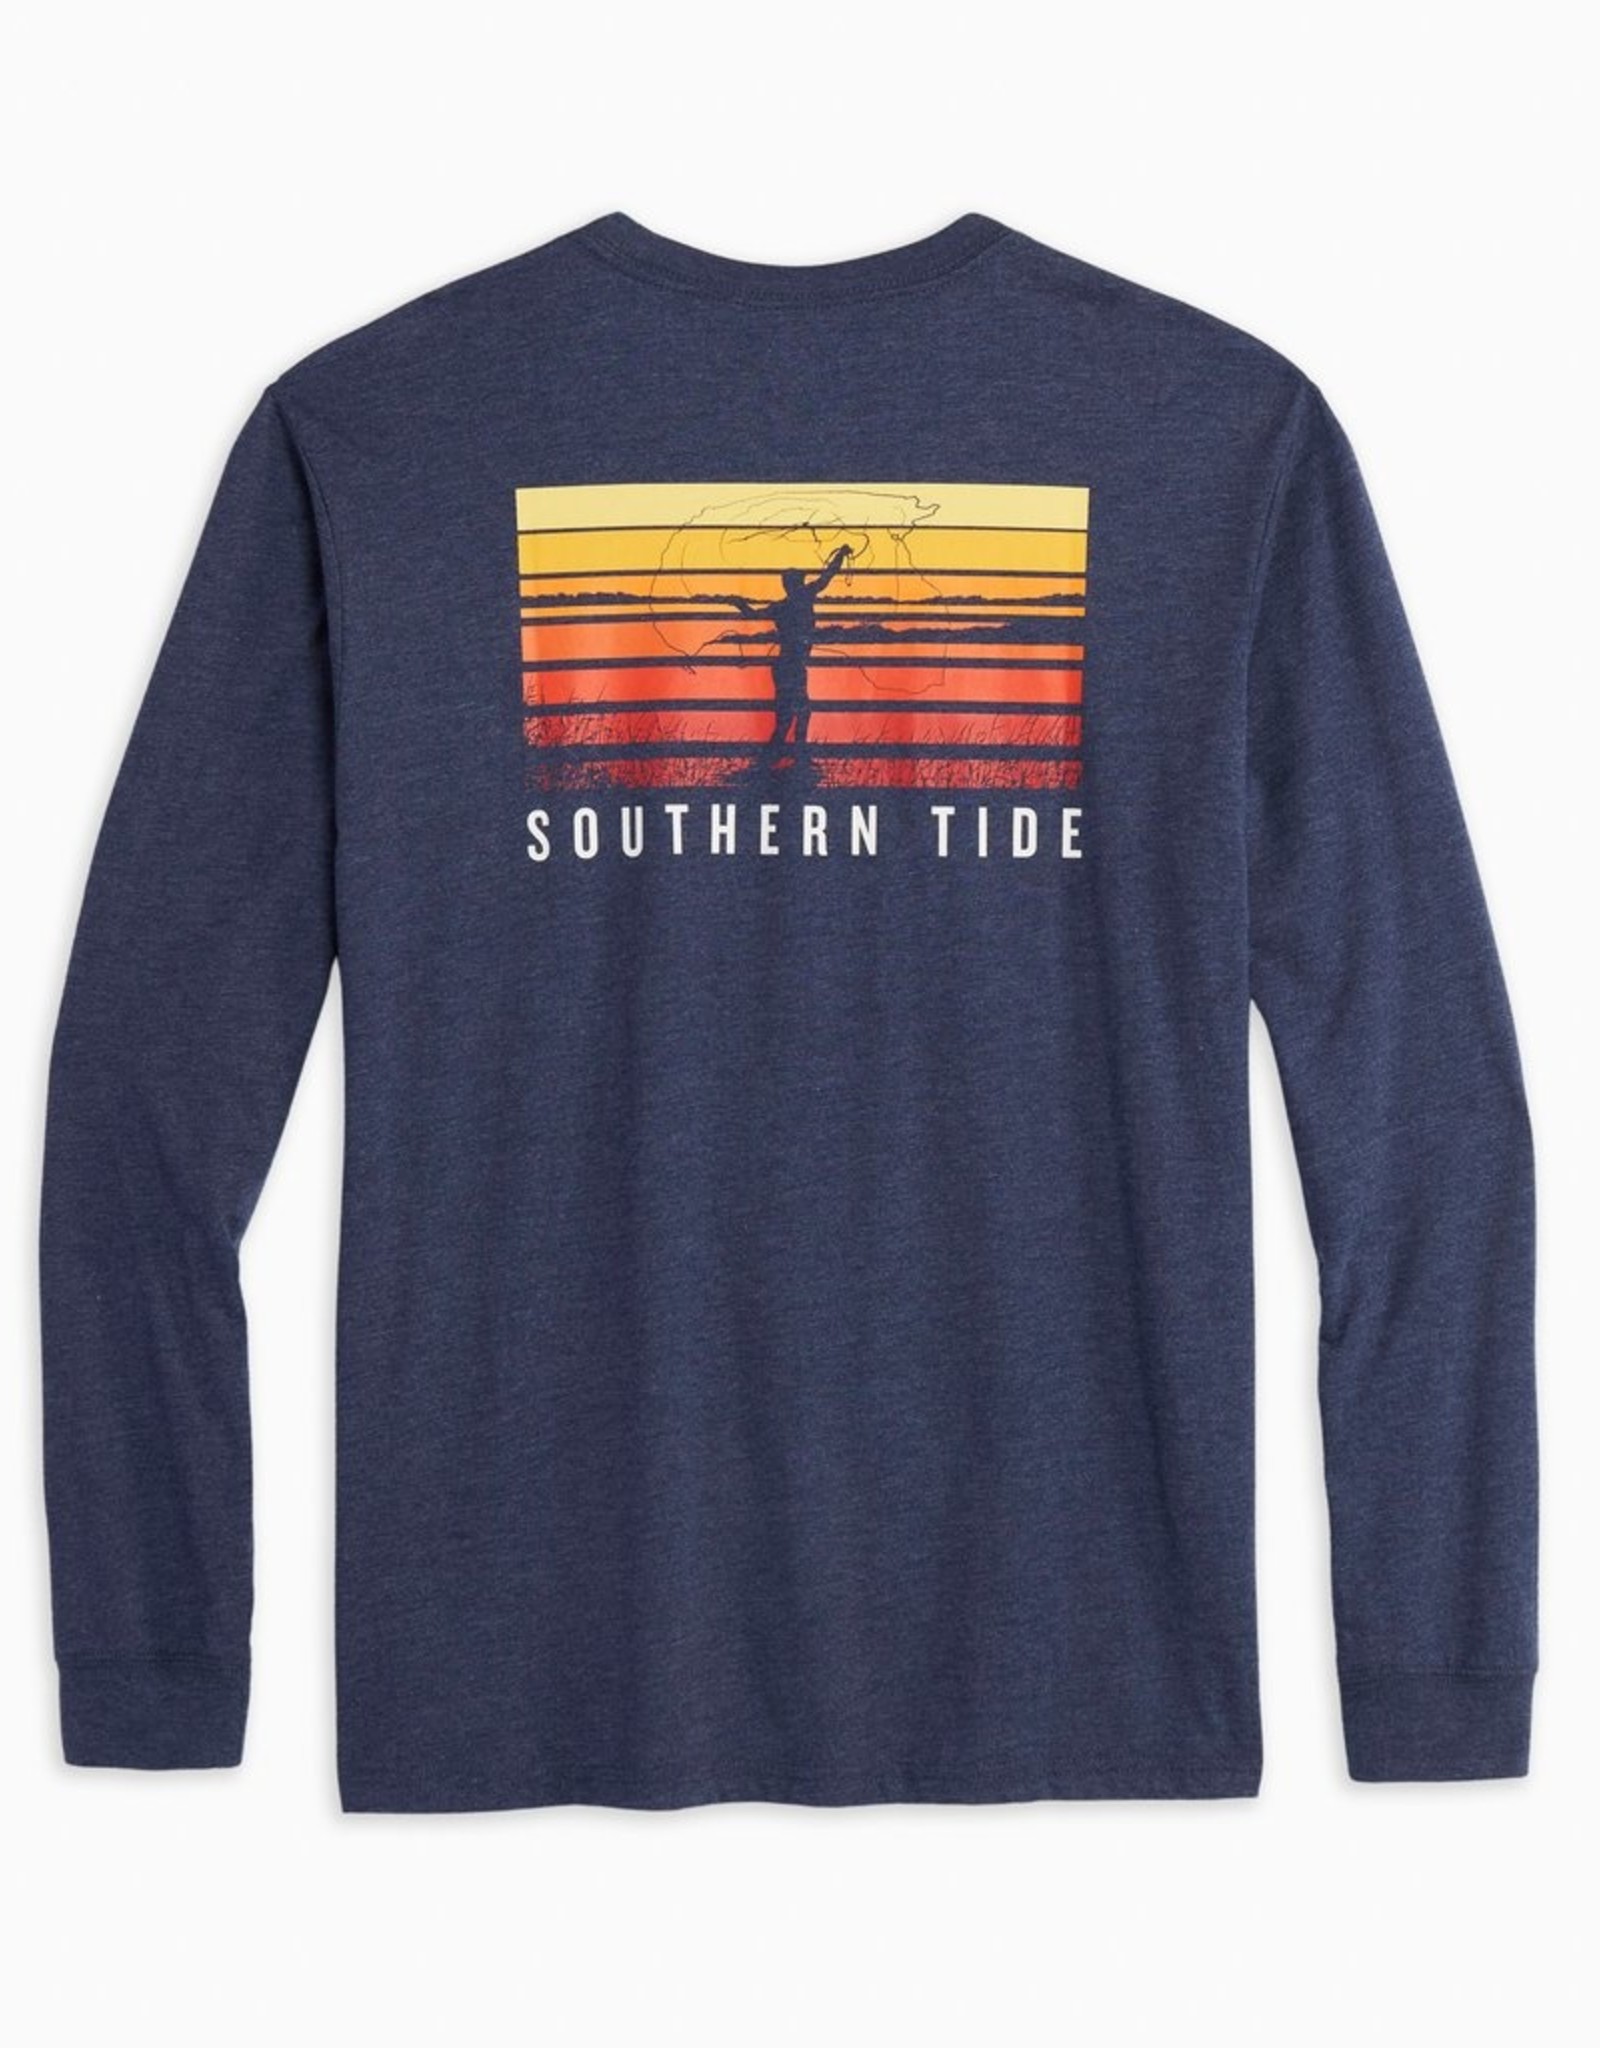 Southern Tide Early Morning Shrimping Tee